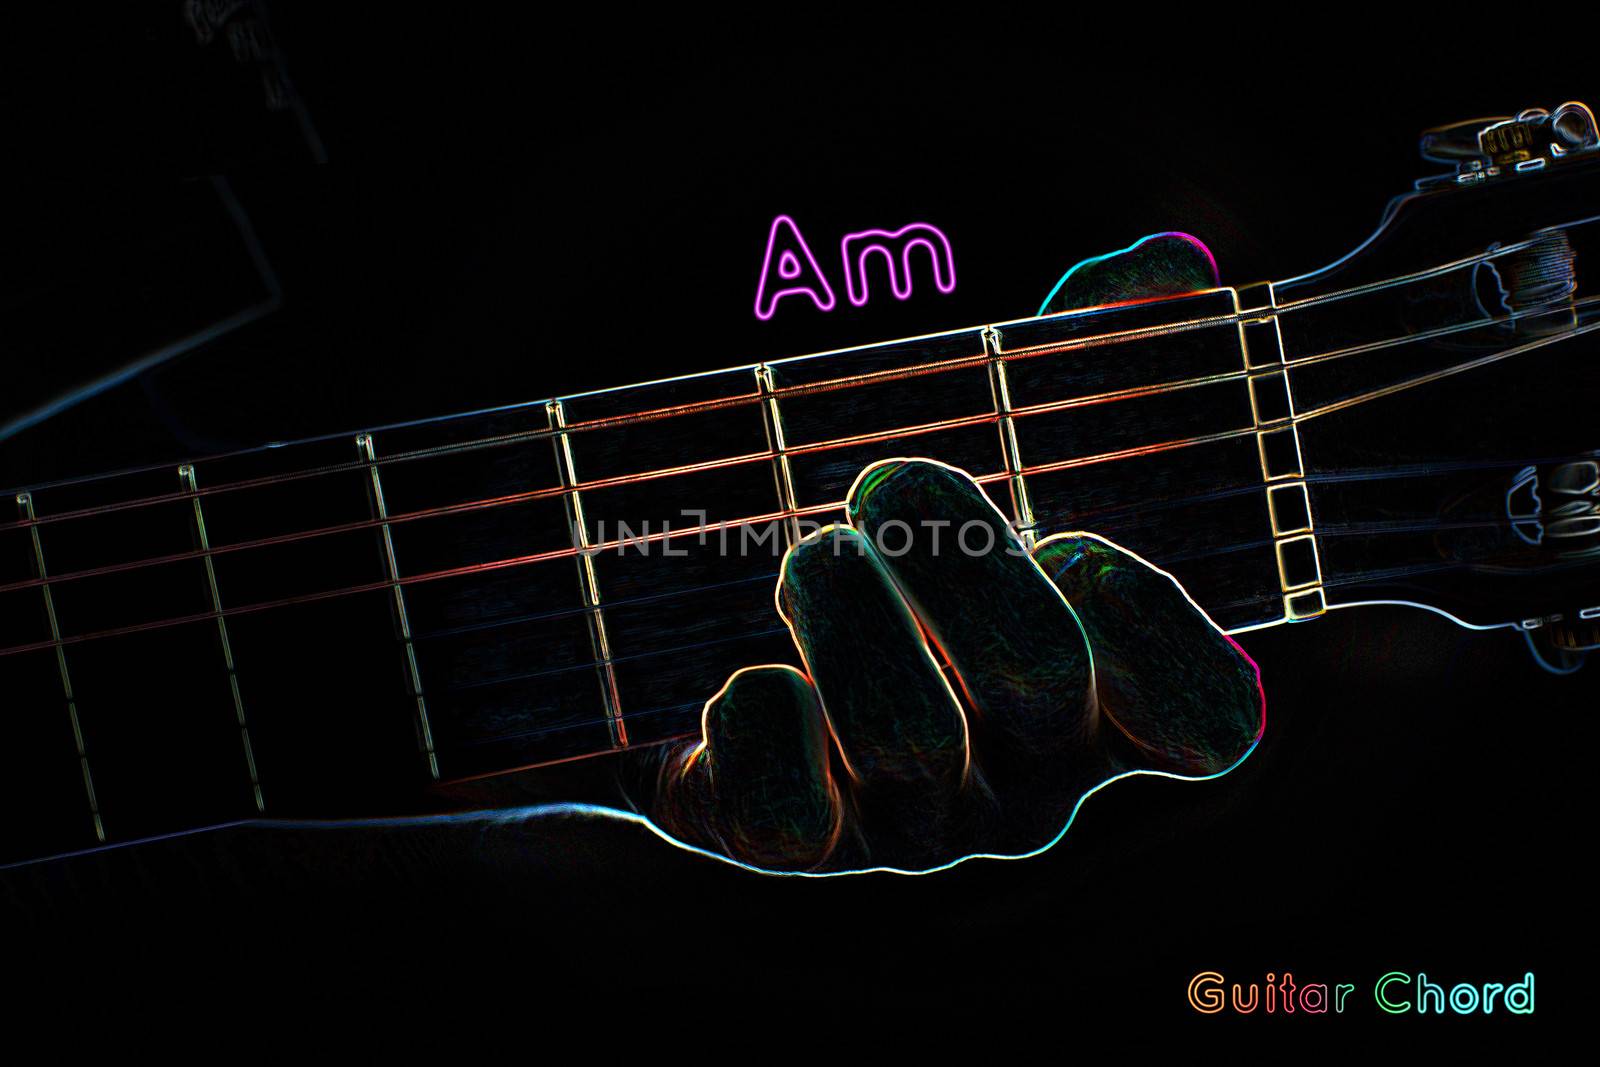 Guitar chord on a dark background, stylized illustration of an X-ray. Am chord